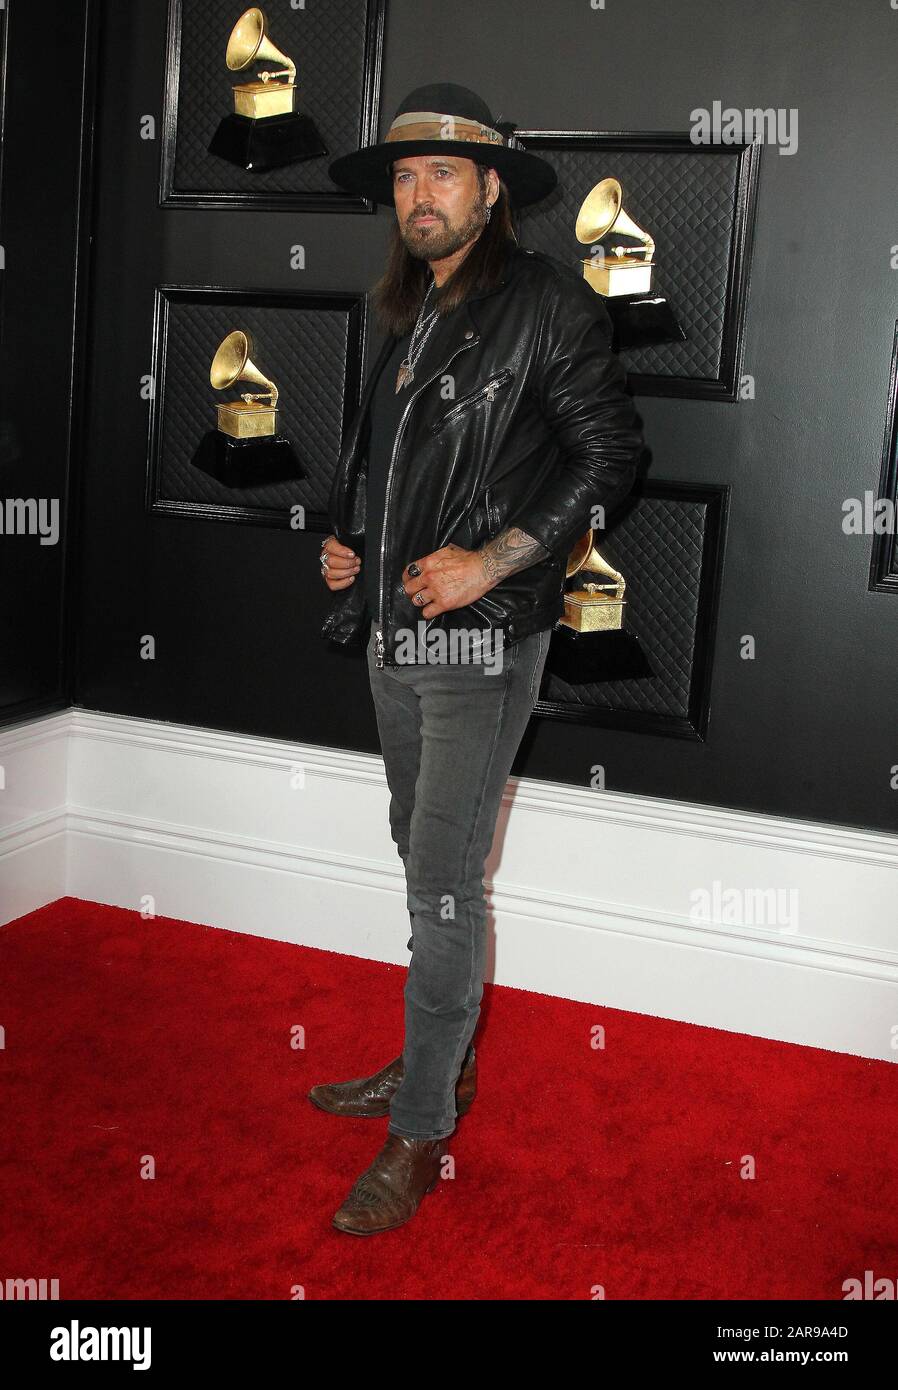 Los Angeles, USA. 26th Jan 2020. Billy Ray Cyrus. 62nd Annual GRAMMY Awards held at Staples Center. Photo Credit: AdMedia /MediaPunch Credit: MediaPunch Inc/Alamy Live News Stock Photo